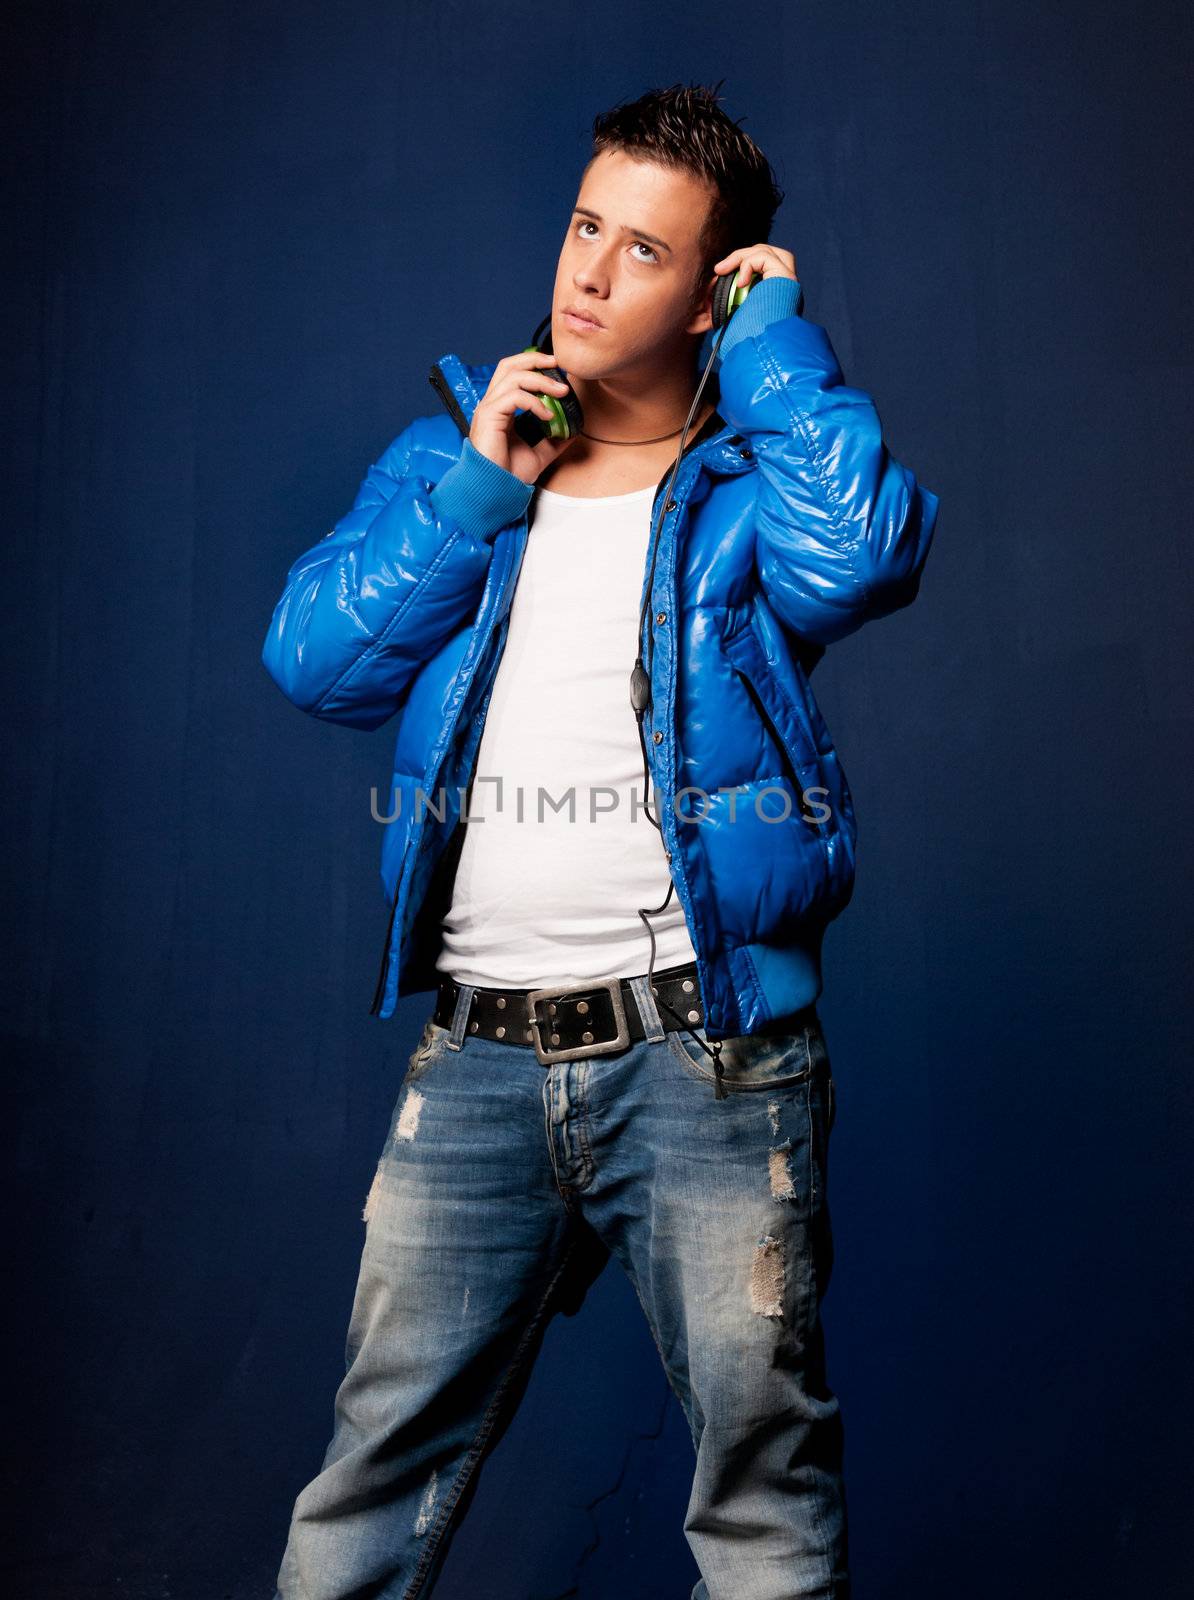 Young man listening music with headphones standing on blue background by dgmata